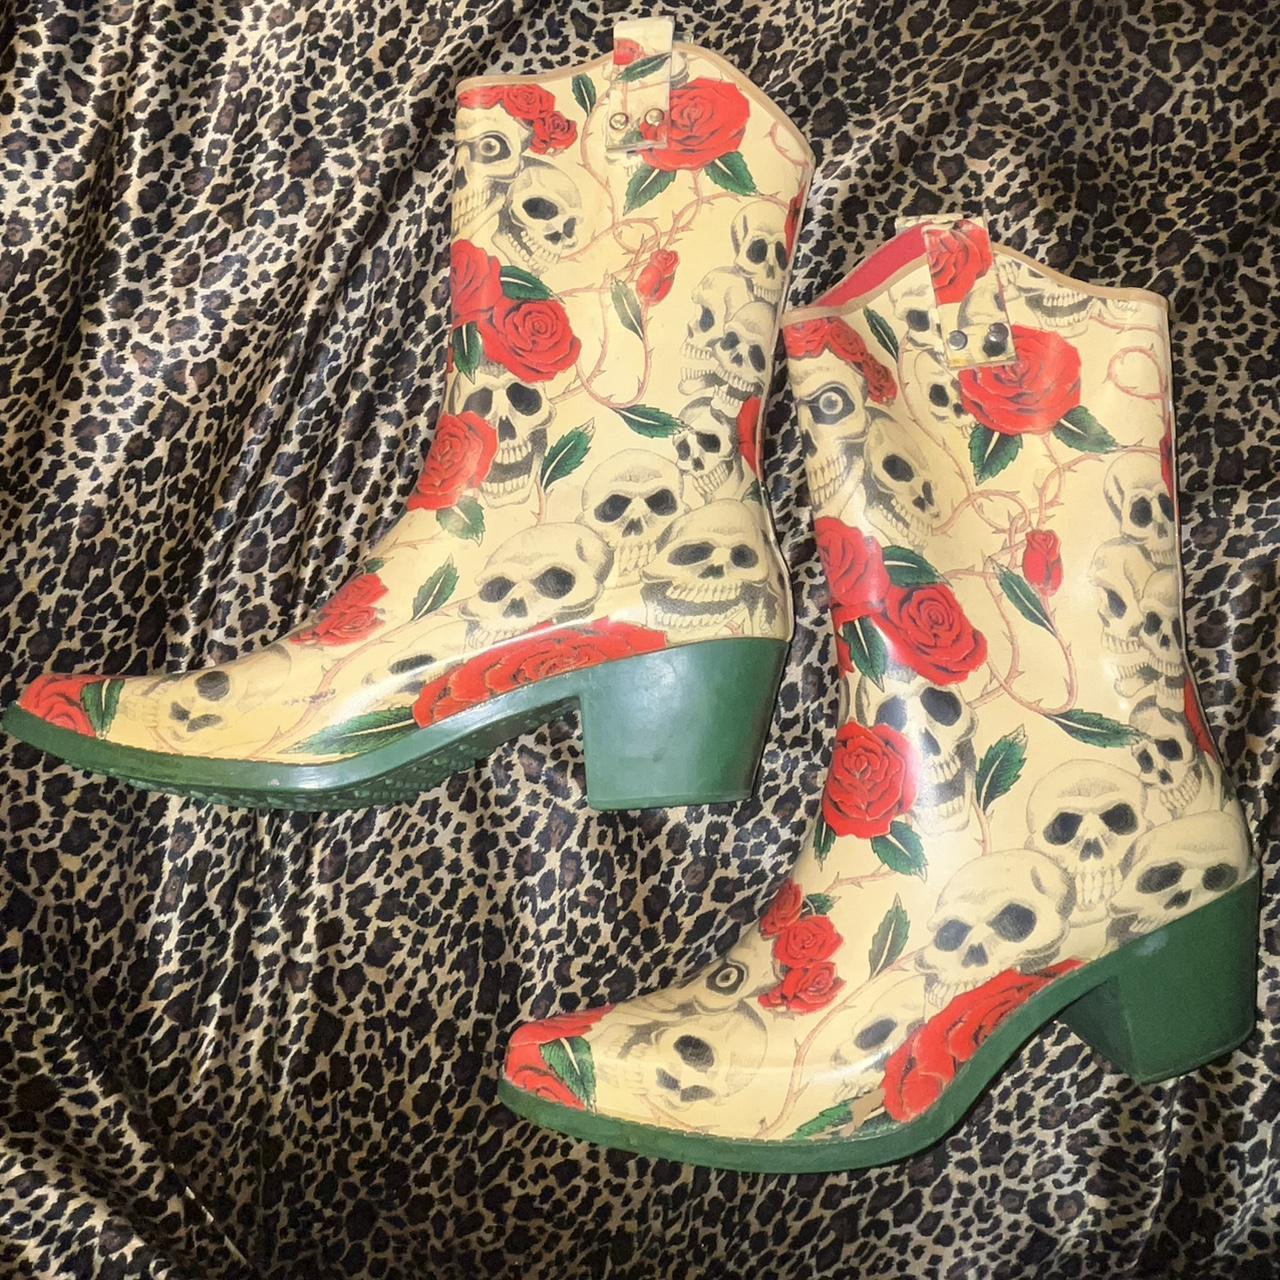 Skull-Rose Rubber Boots (RARE) Size: USA 9 in... - Depop